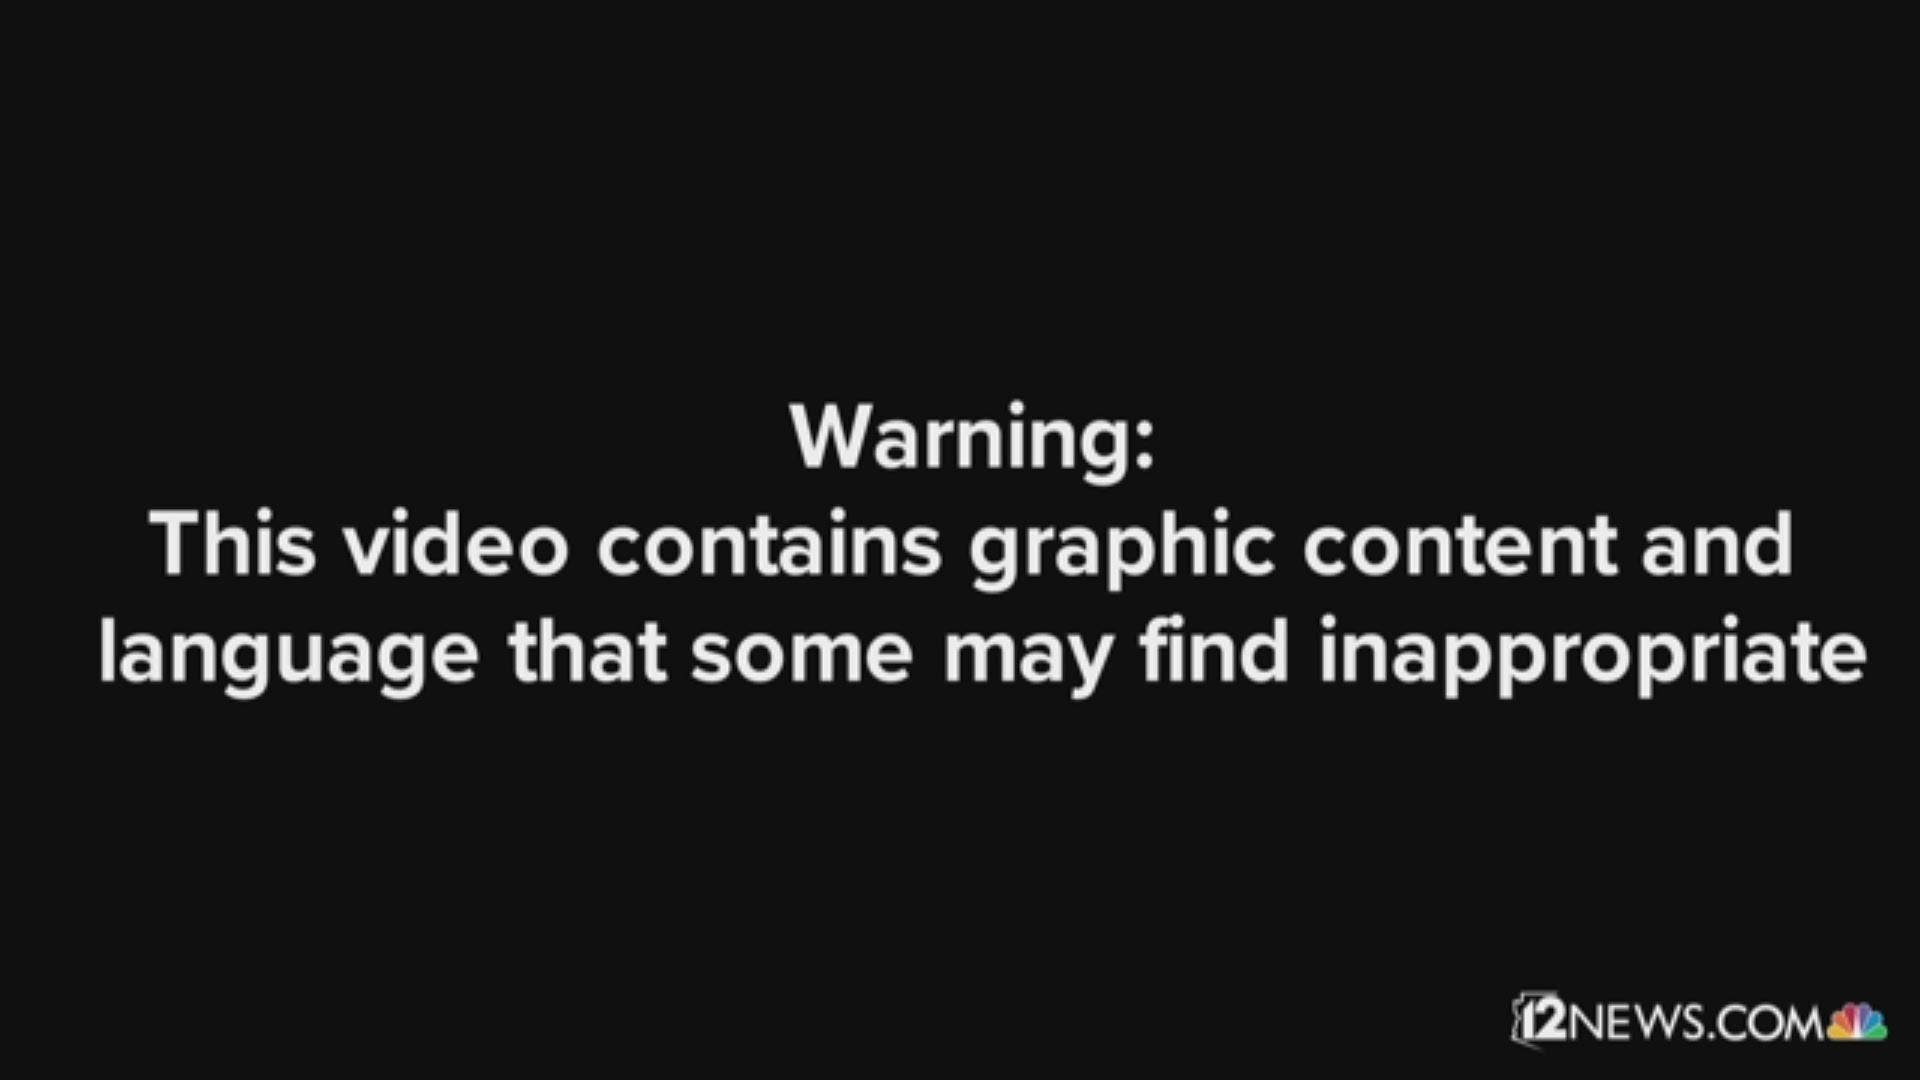 Warning: This video contains graphic content and language that some viewers may find inappropriate. Johnny Wheatcroft is taking action against Glendale PD following a July 2017 incident where his attorney says he was tased 11 times by Glendale officers. Officers Matt Schneider and Mark Lindsey walked up to a Ford Taurus which had Wheatcroft's two sons and two other adults inside. According to police, Wheatcroft physically resisted officers as they tried to remove him. That's when they tased him.